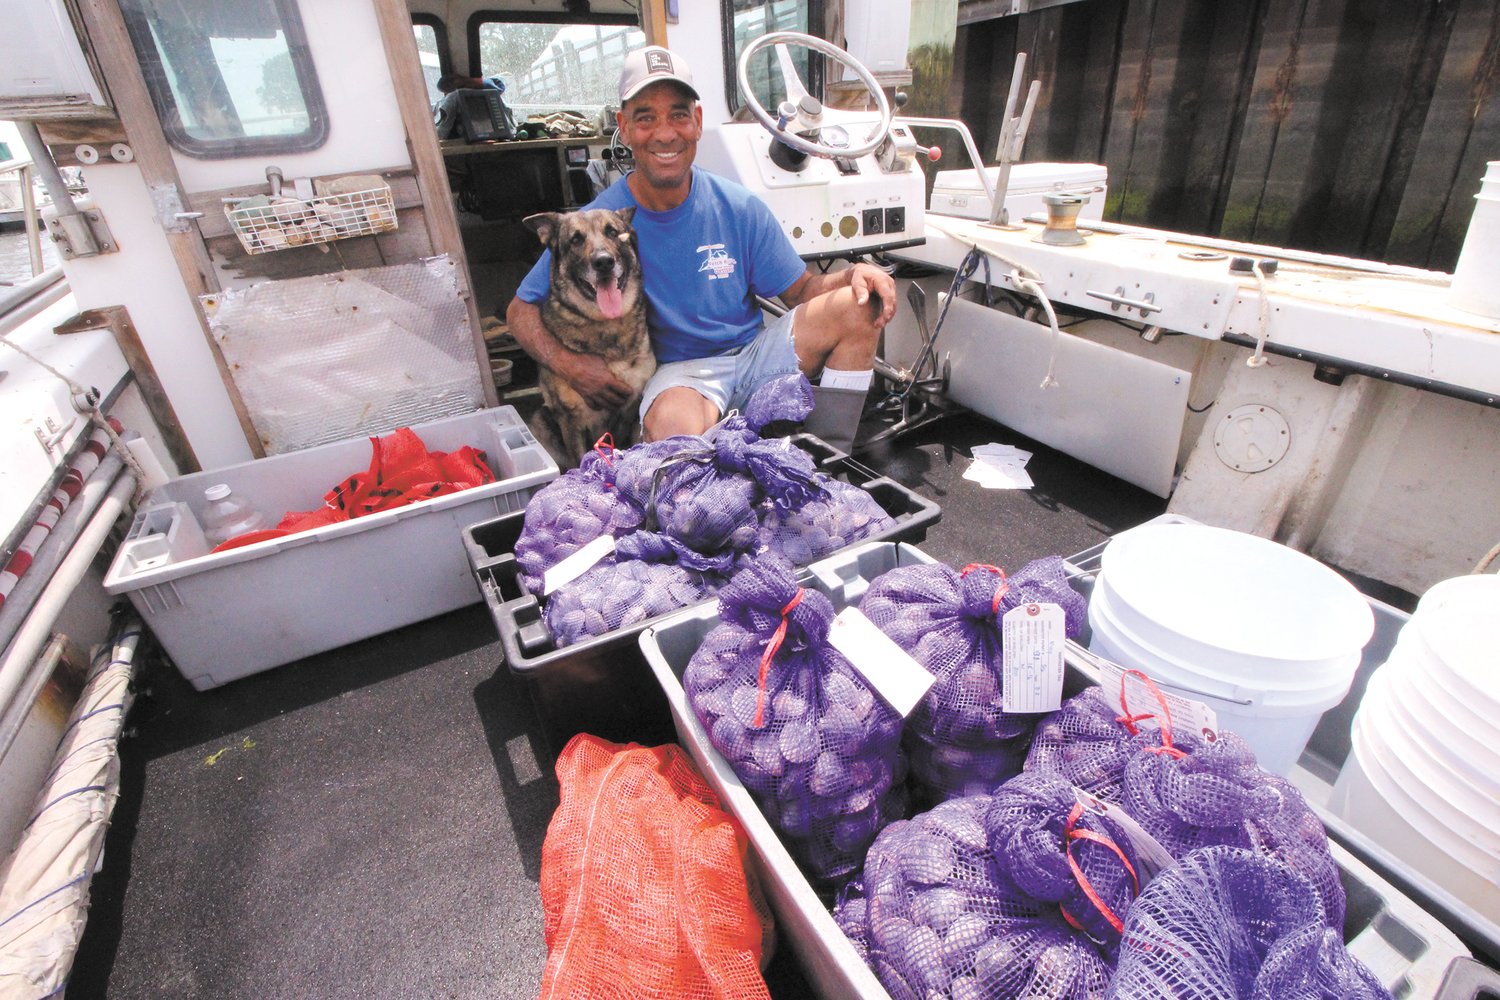 BUSHELS OF LITTLE NECKS: Jody King who is almost always accompanied by his dog Nosmo prepares to off load Tuesday’s catch after returning to the marina in Oakland Beach.  (Warwick Beacon photos)